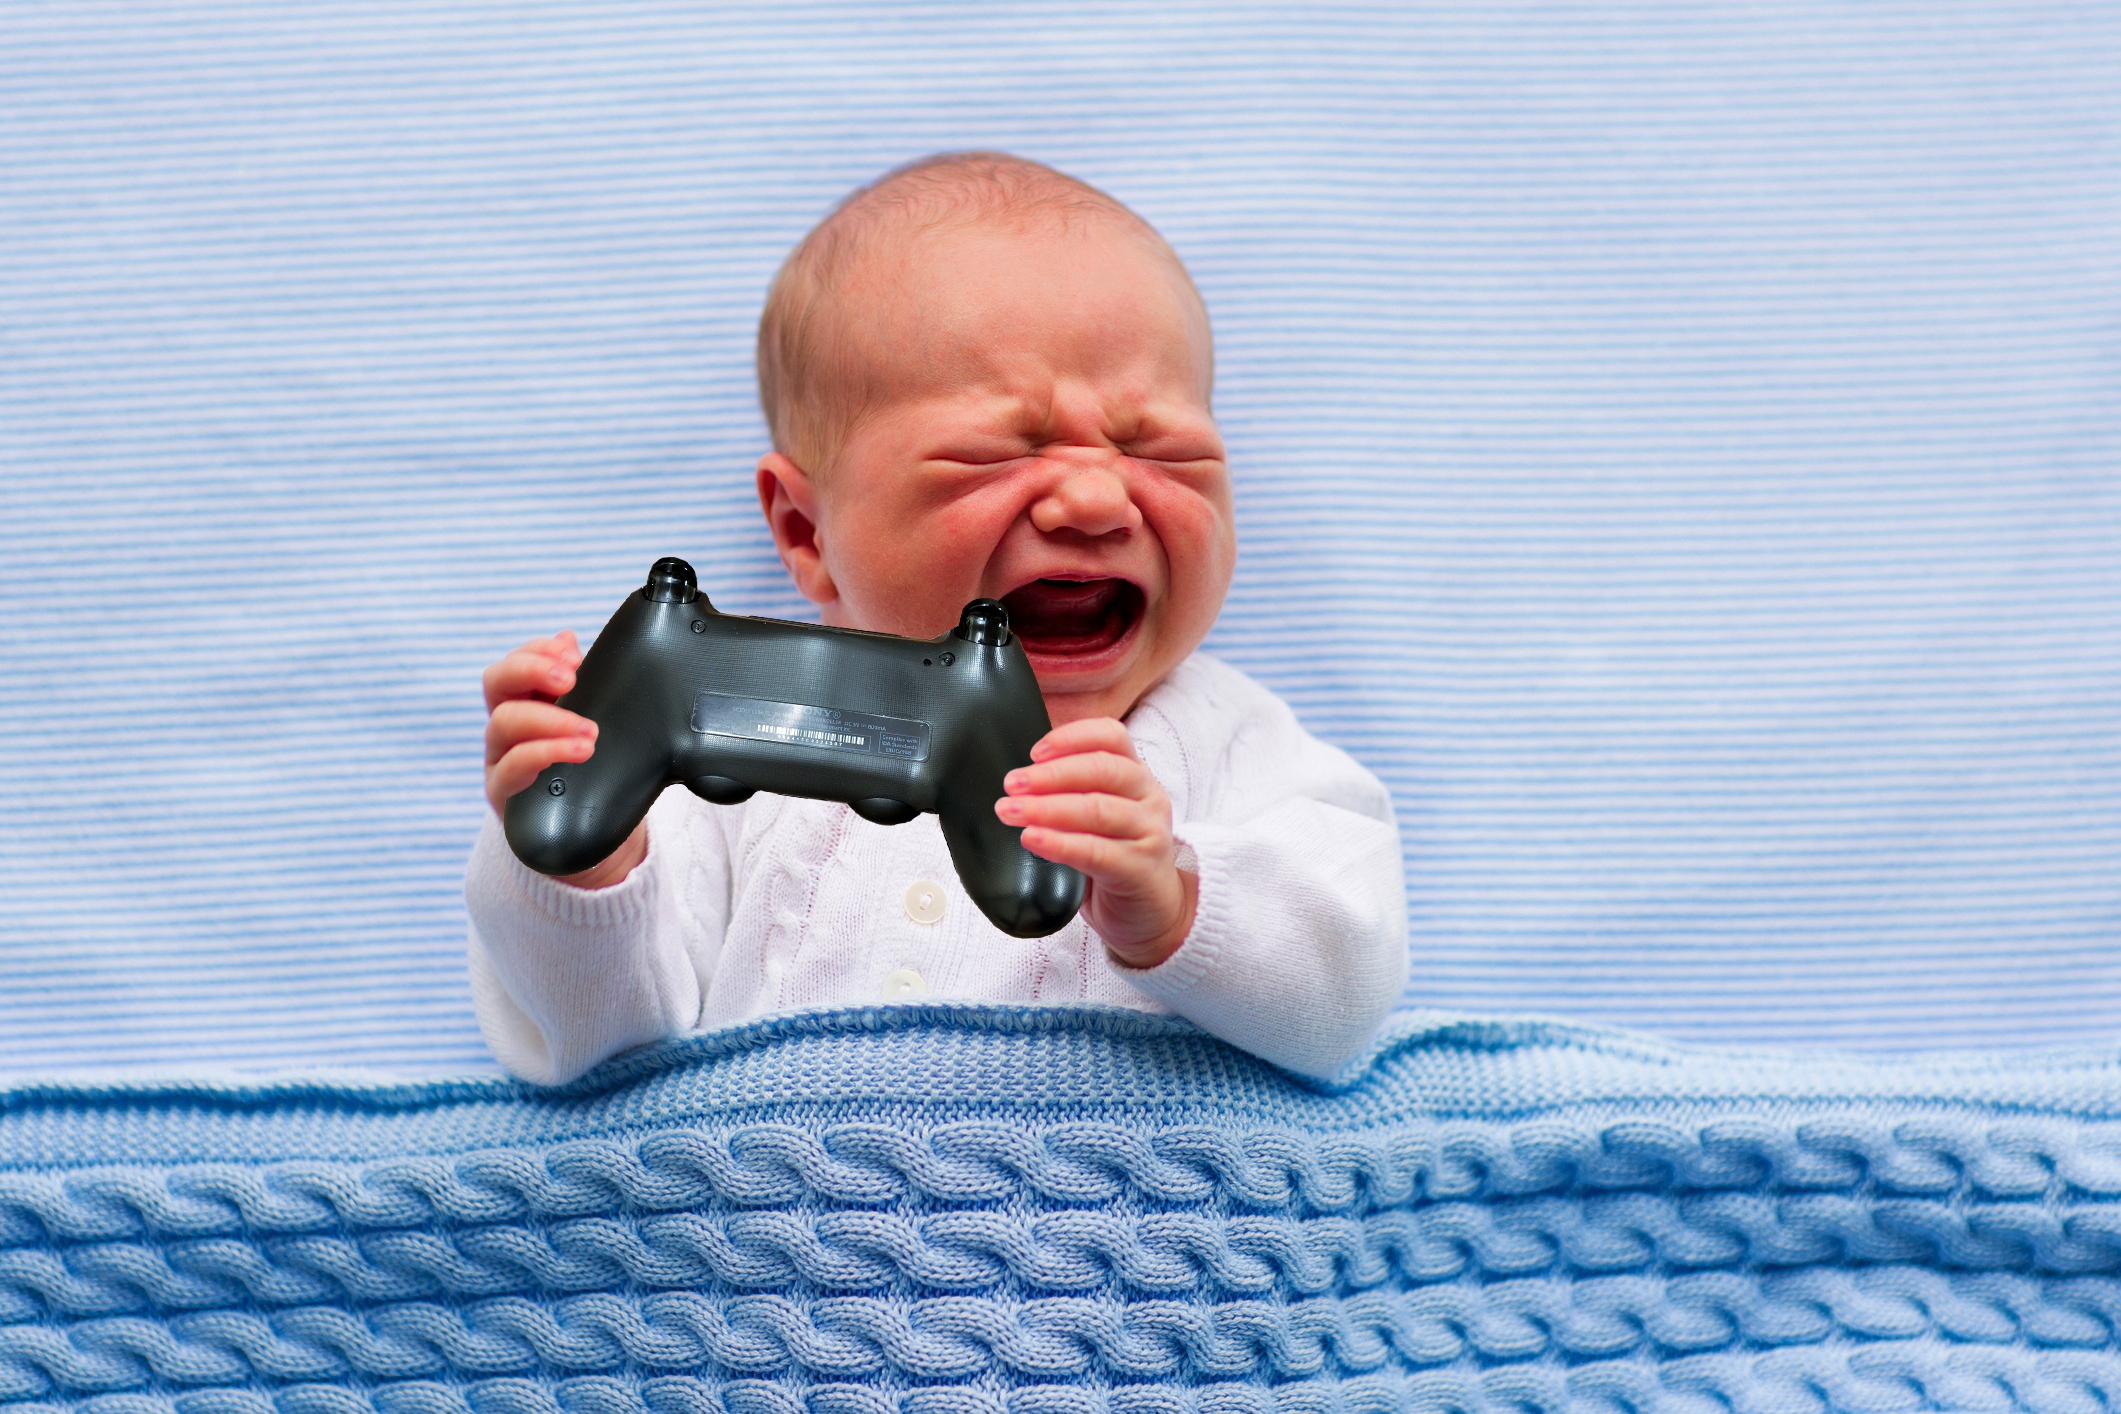 Baby cries, holding video game controlling